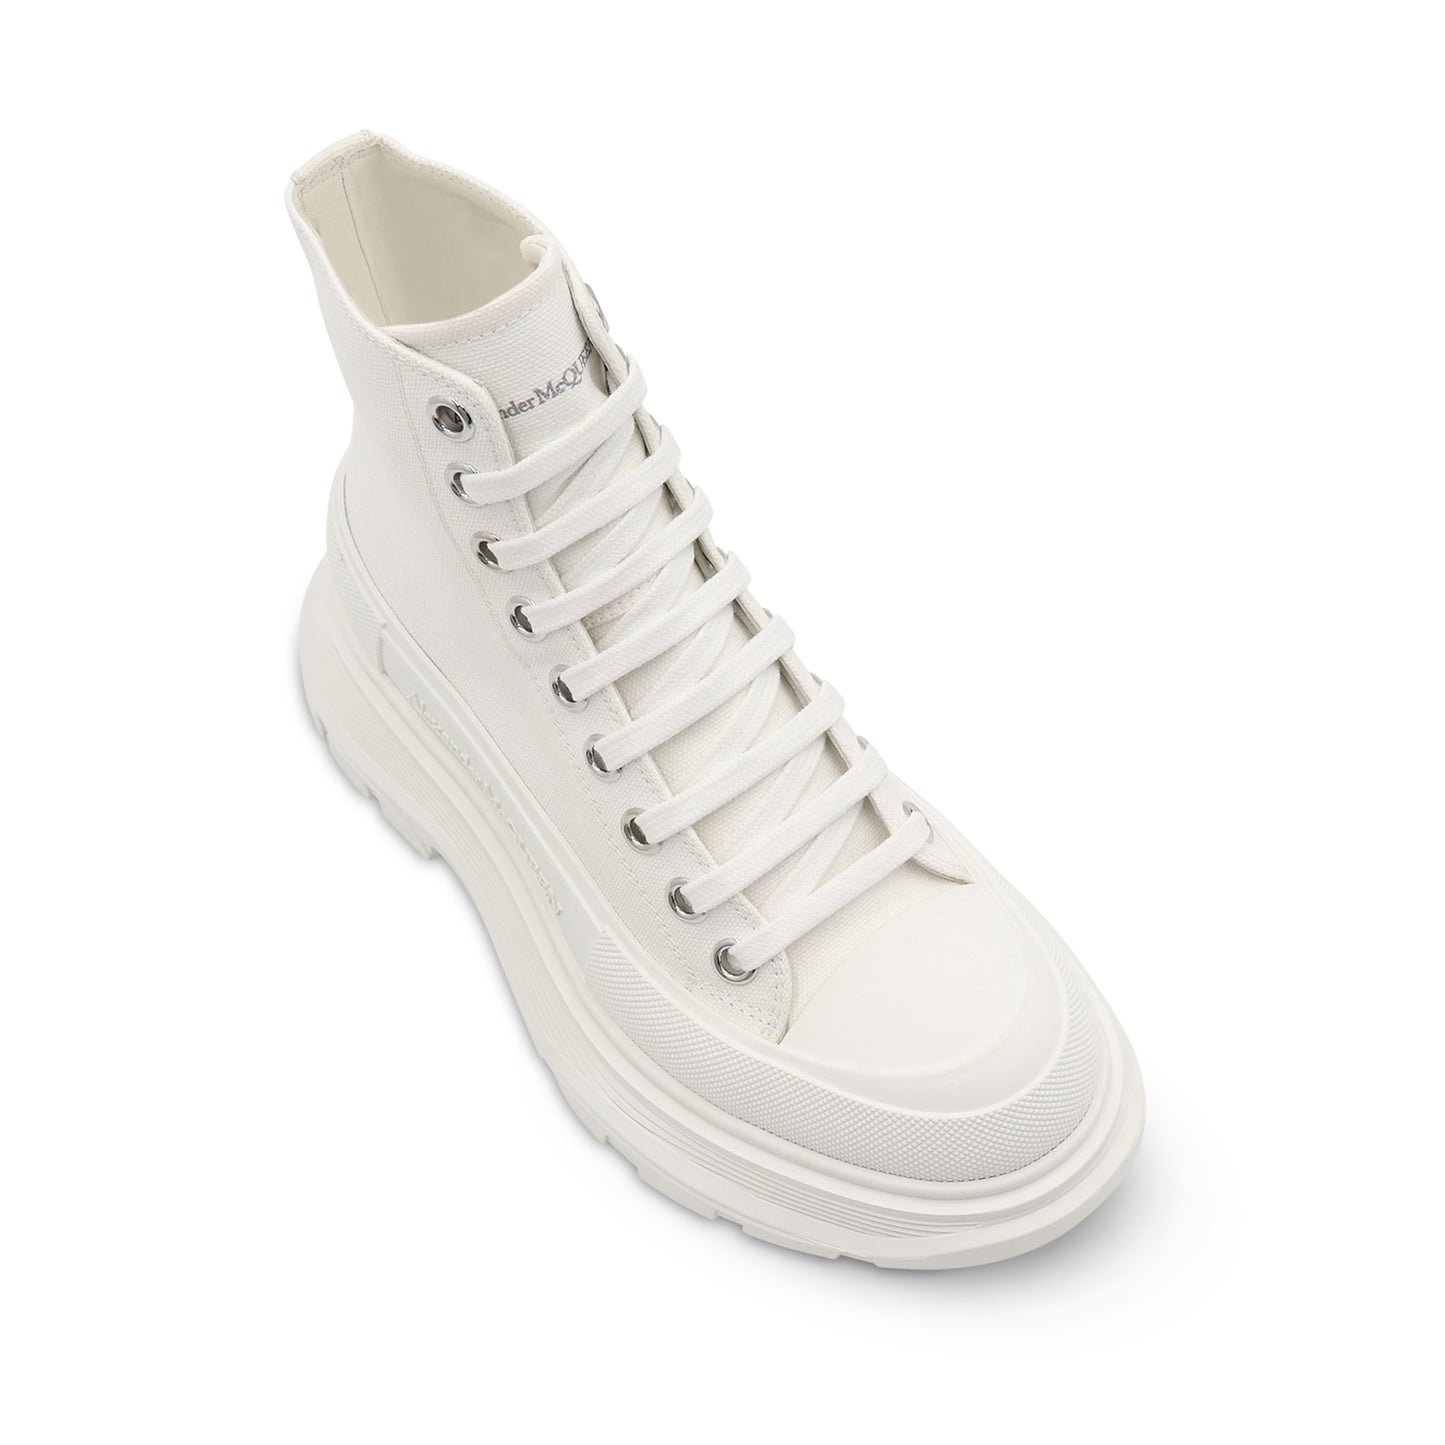 Tread Slick Canvas Lace-Up Boots in White